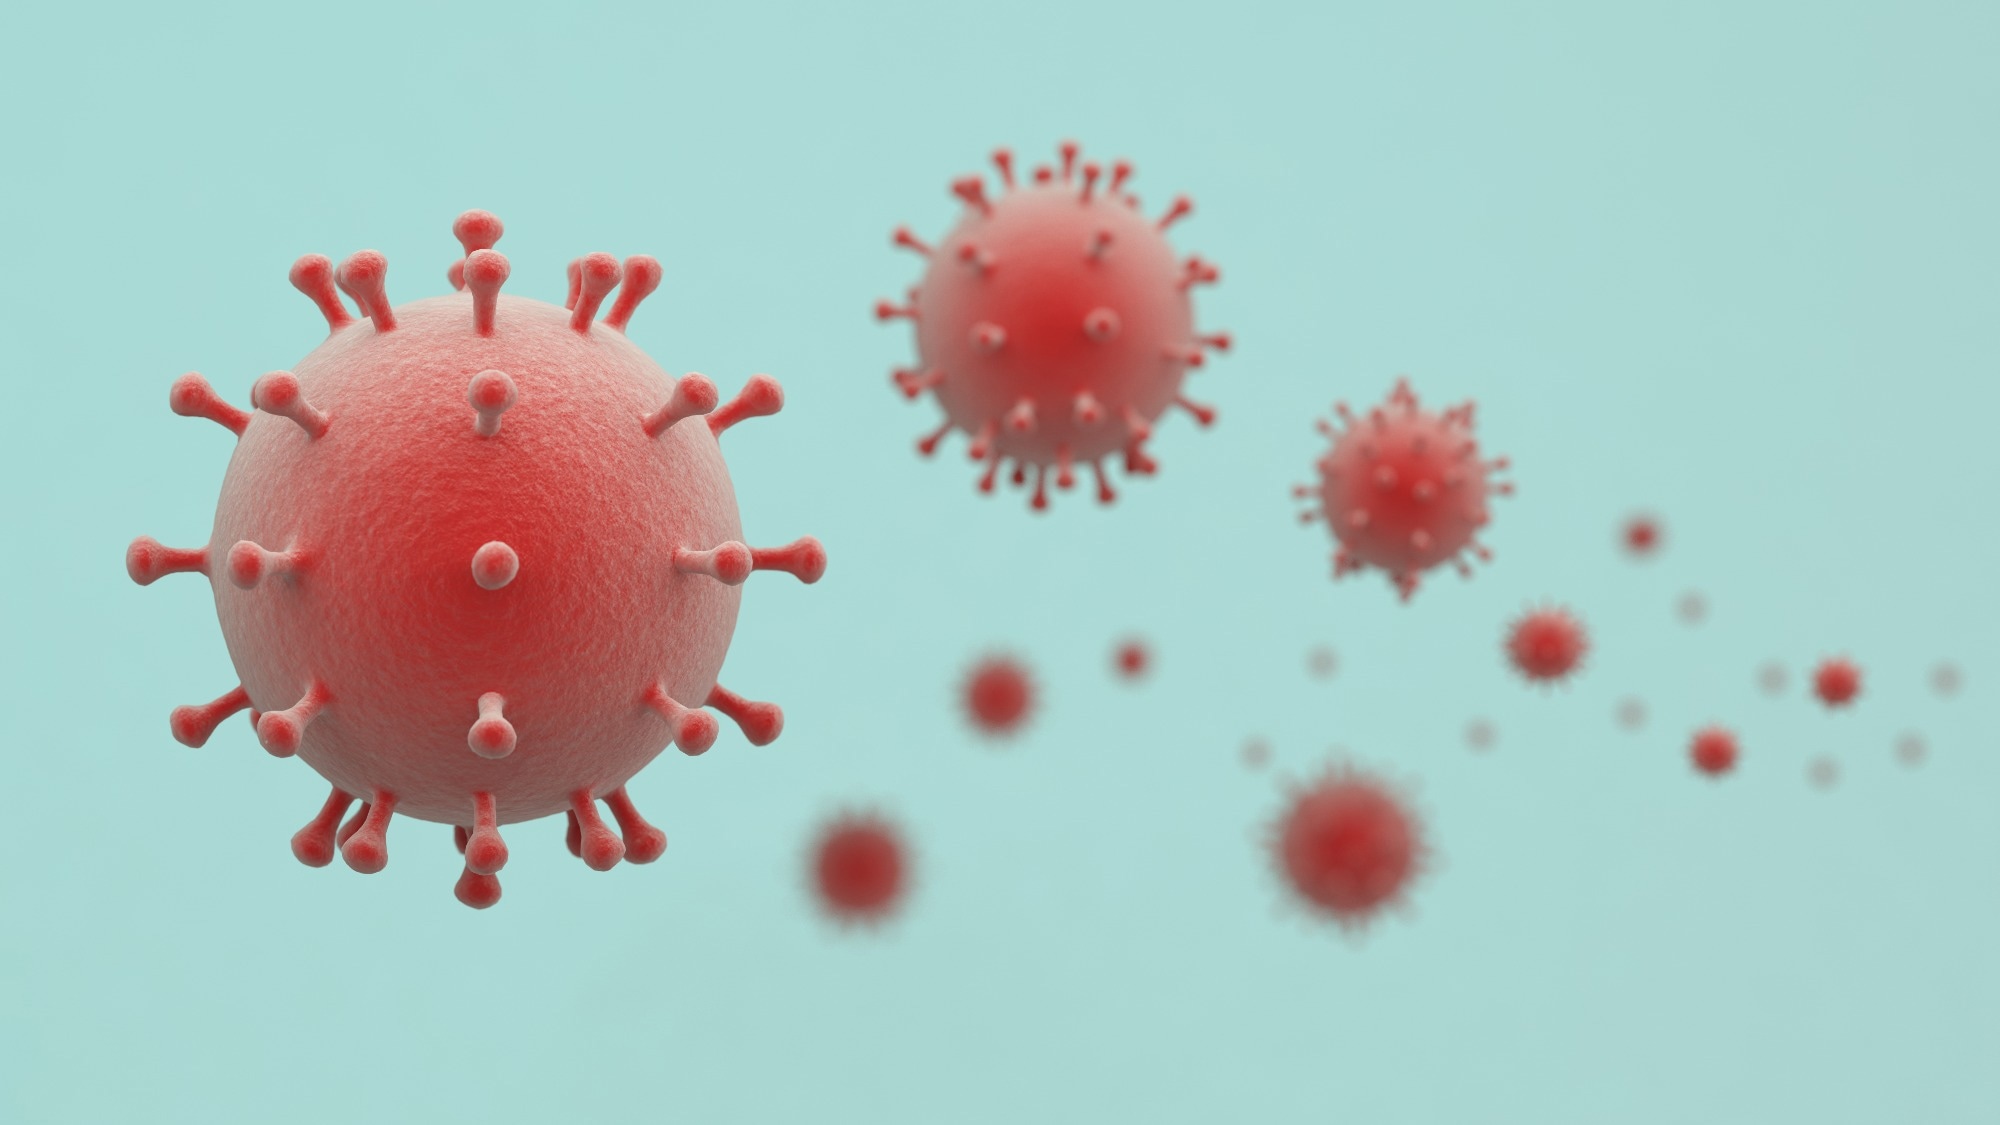 People living with HIV respond well to COVID-19 infection and vaccination